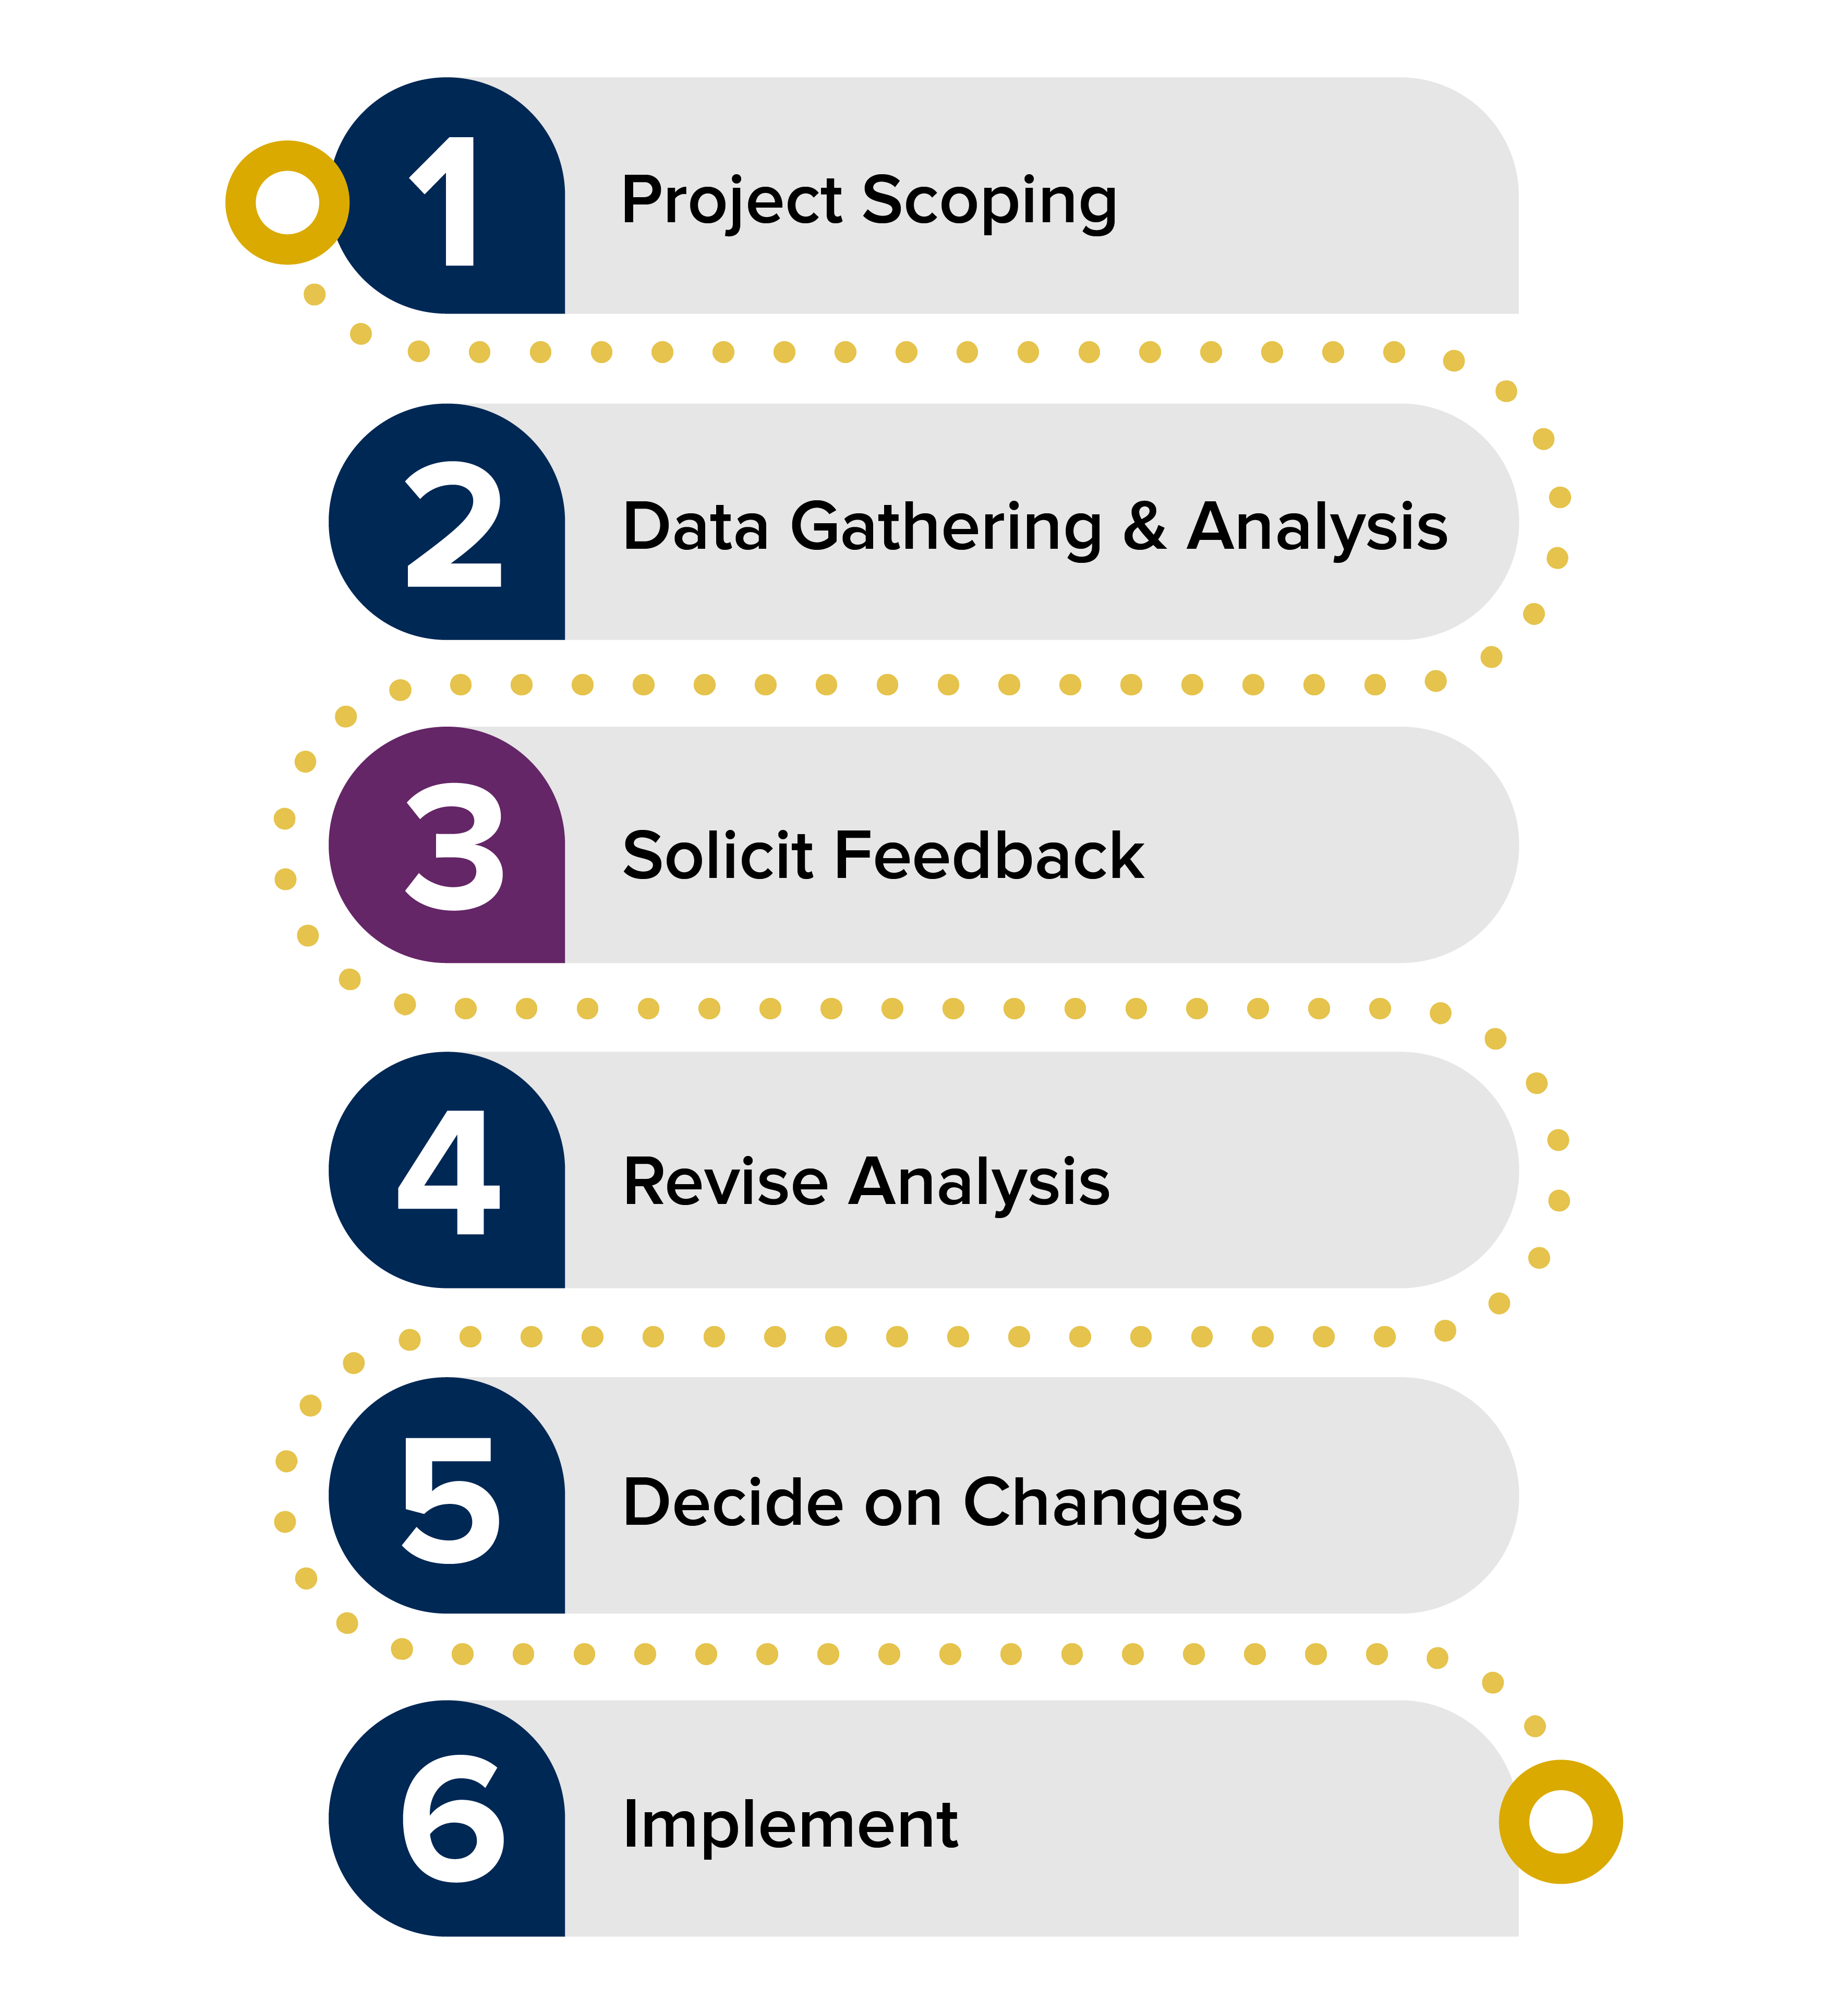 Step 3, Solicit Feedback, is highlighted in a six-step process including Project Scoping, Data Gathering & Analysis, Solicit Feedback, Revise Analysis, Decide on Changes, and Implement.